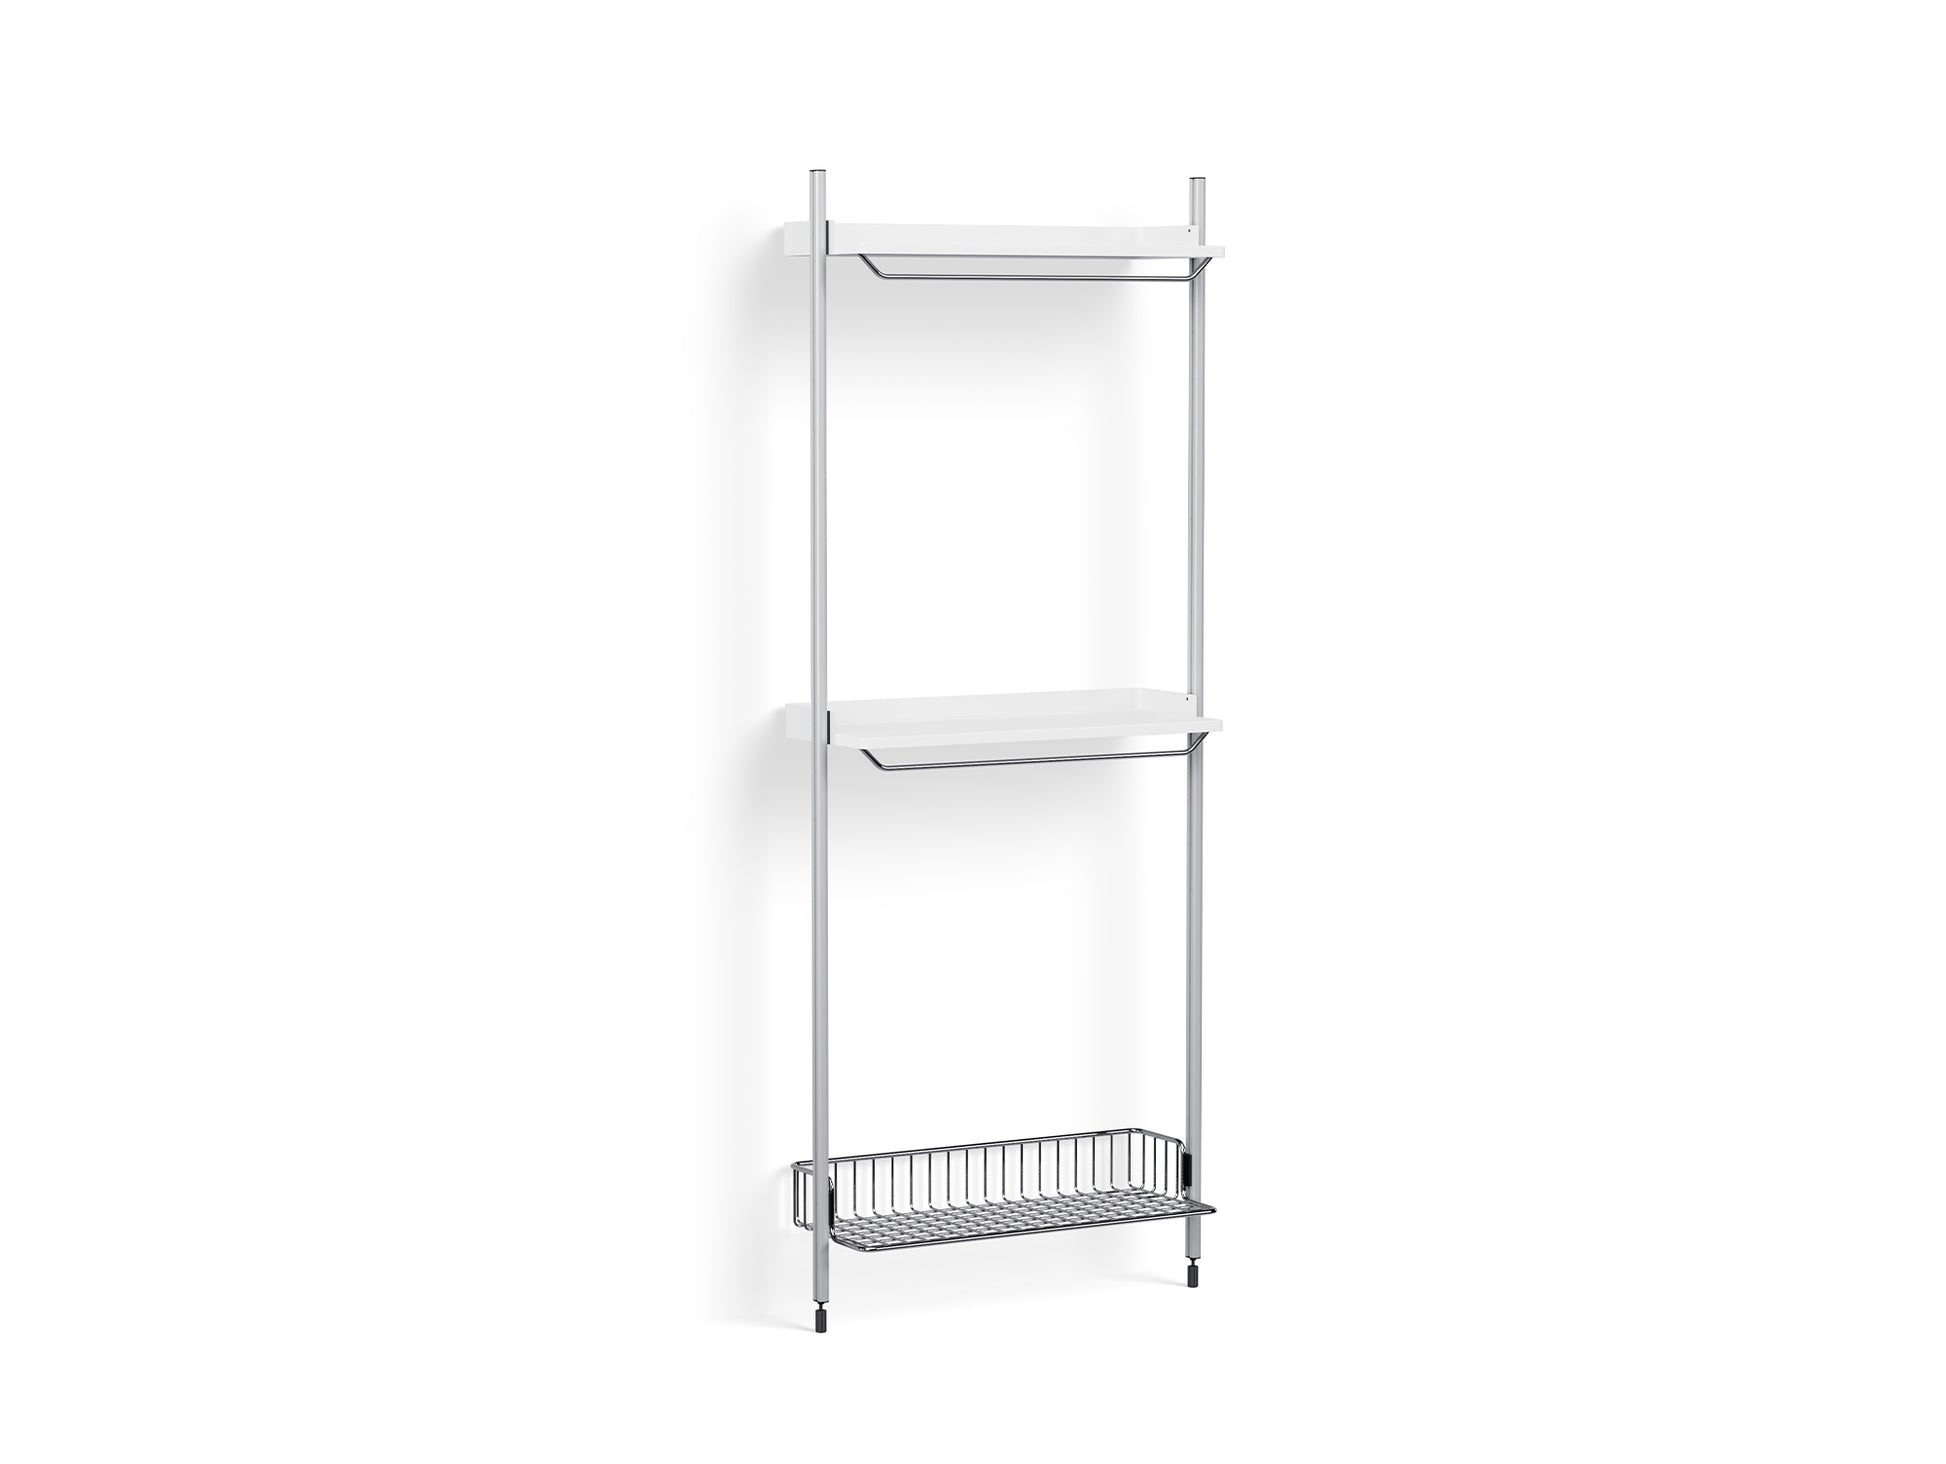 Pier System 1031 by HAY - Clear Anodised Aluminium Uprights / PS white with Chromed Wire Shelf